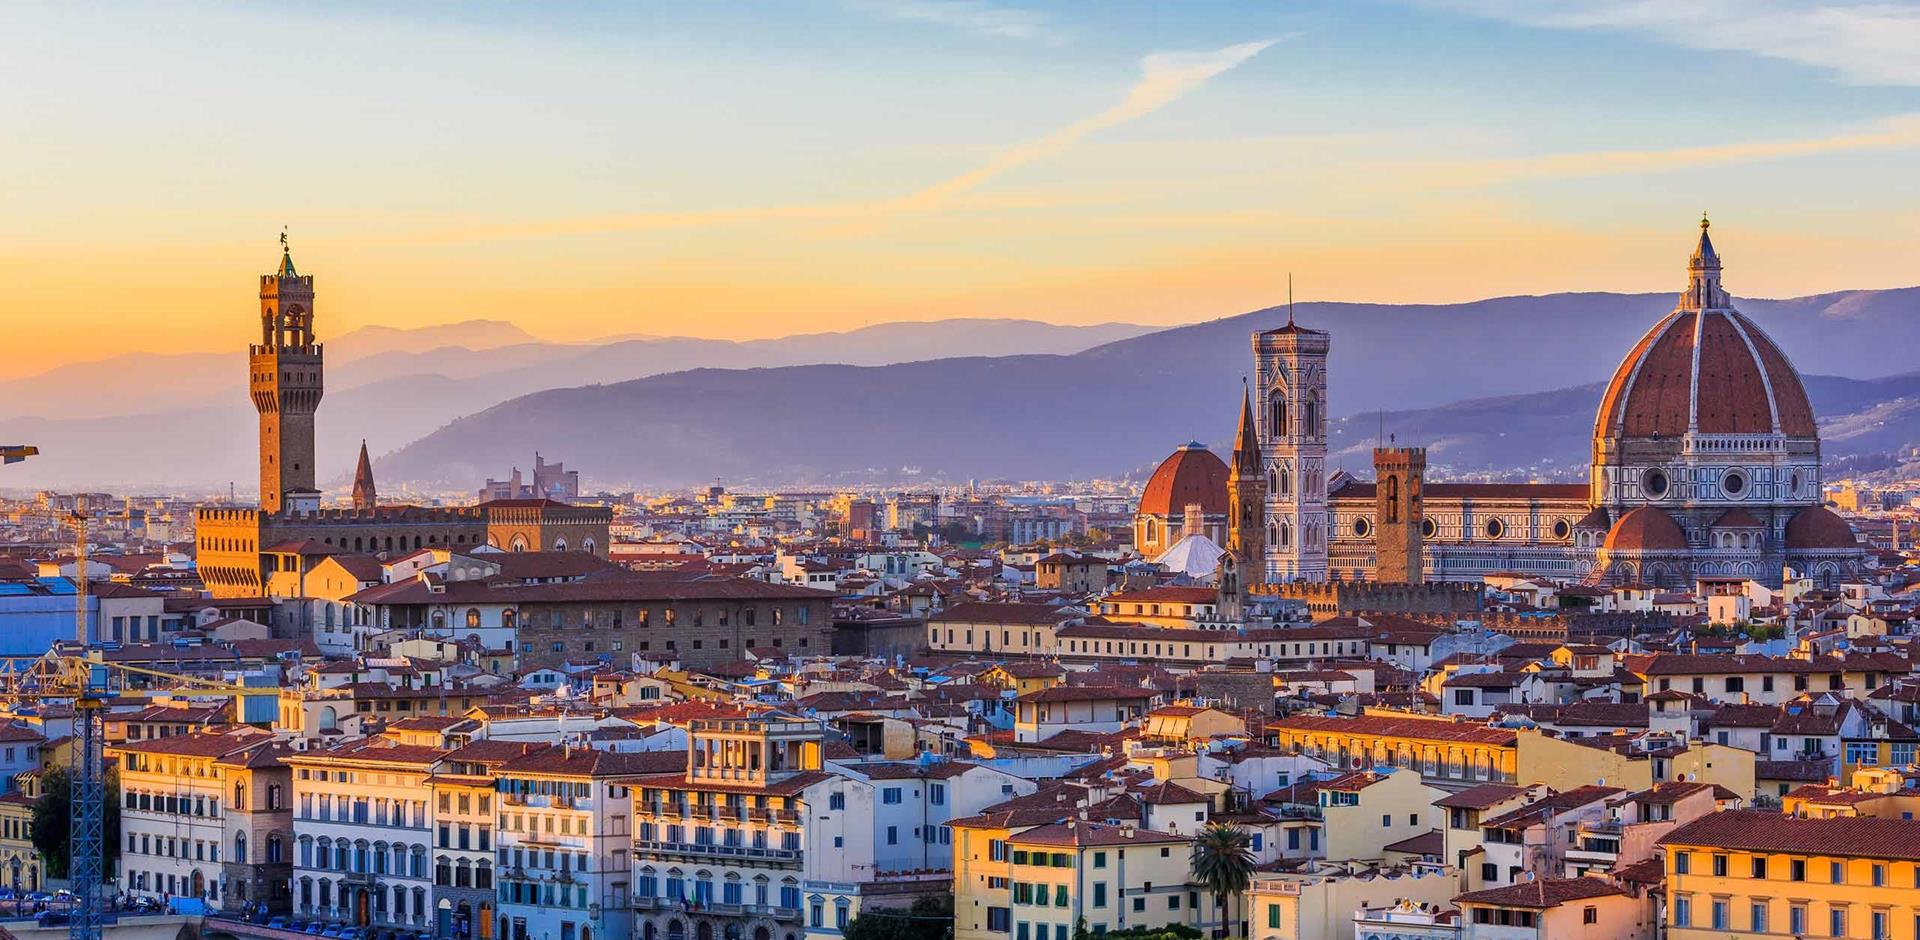 Tailor-made holidays to Florence with Abercrombie & Kent